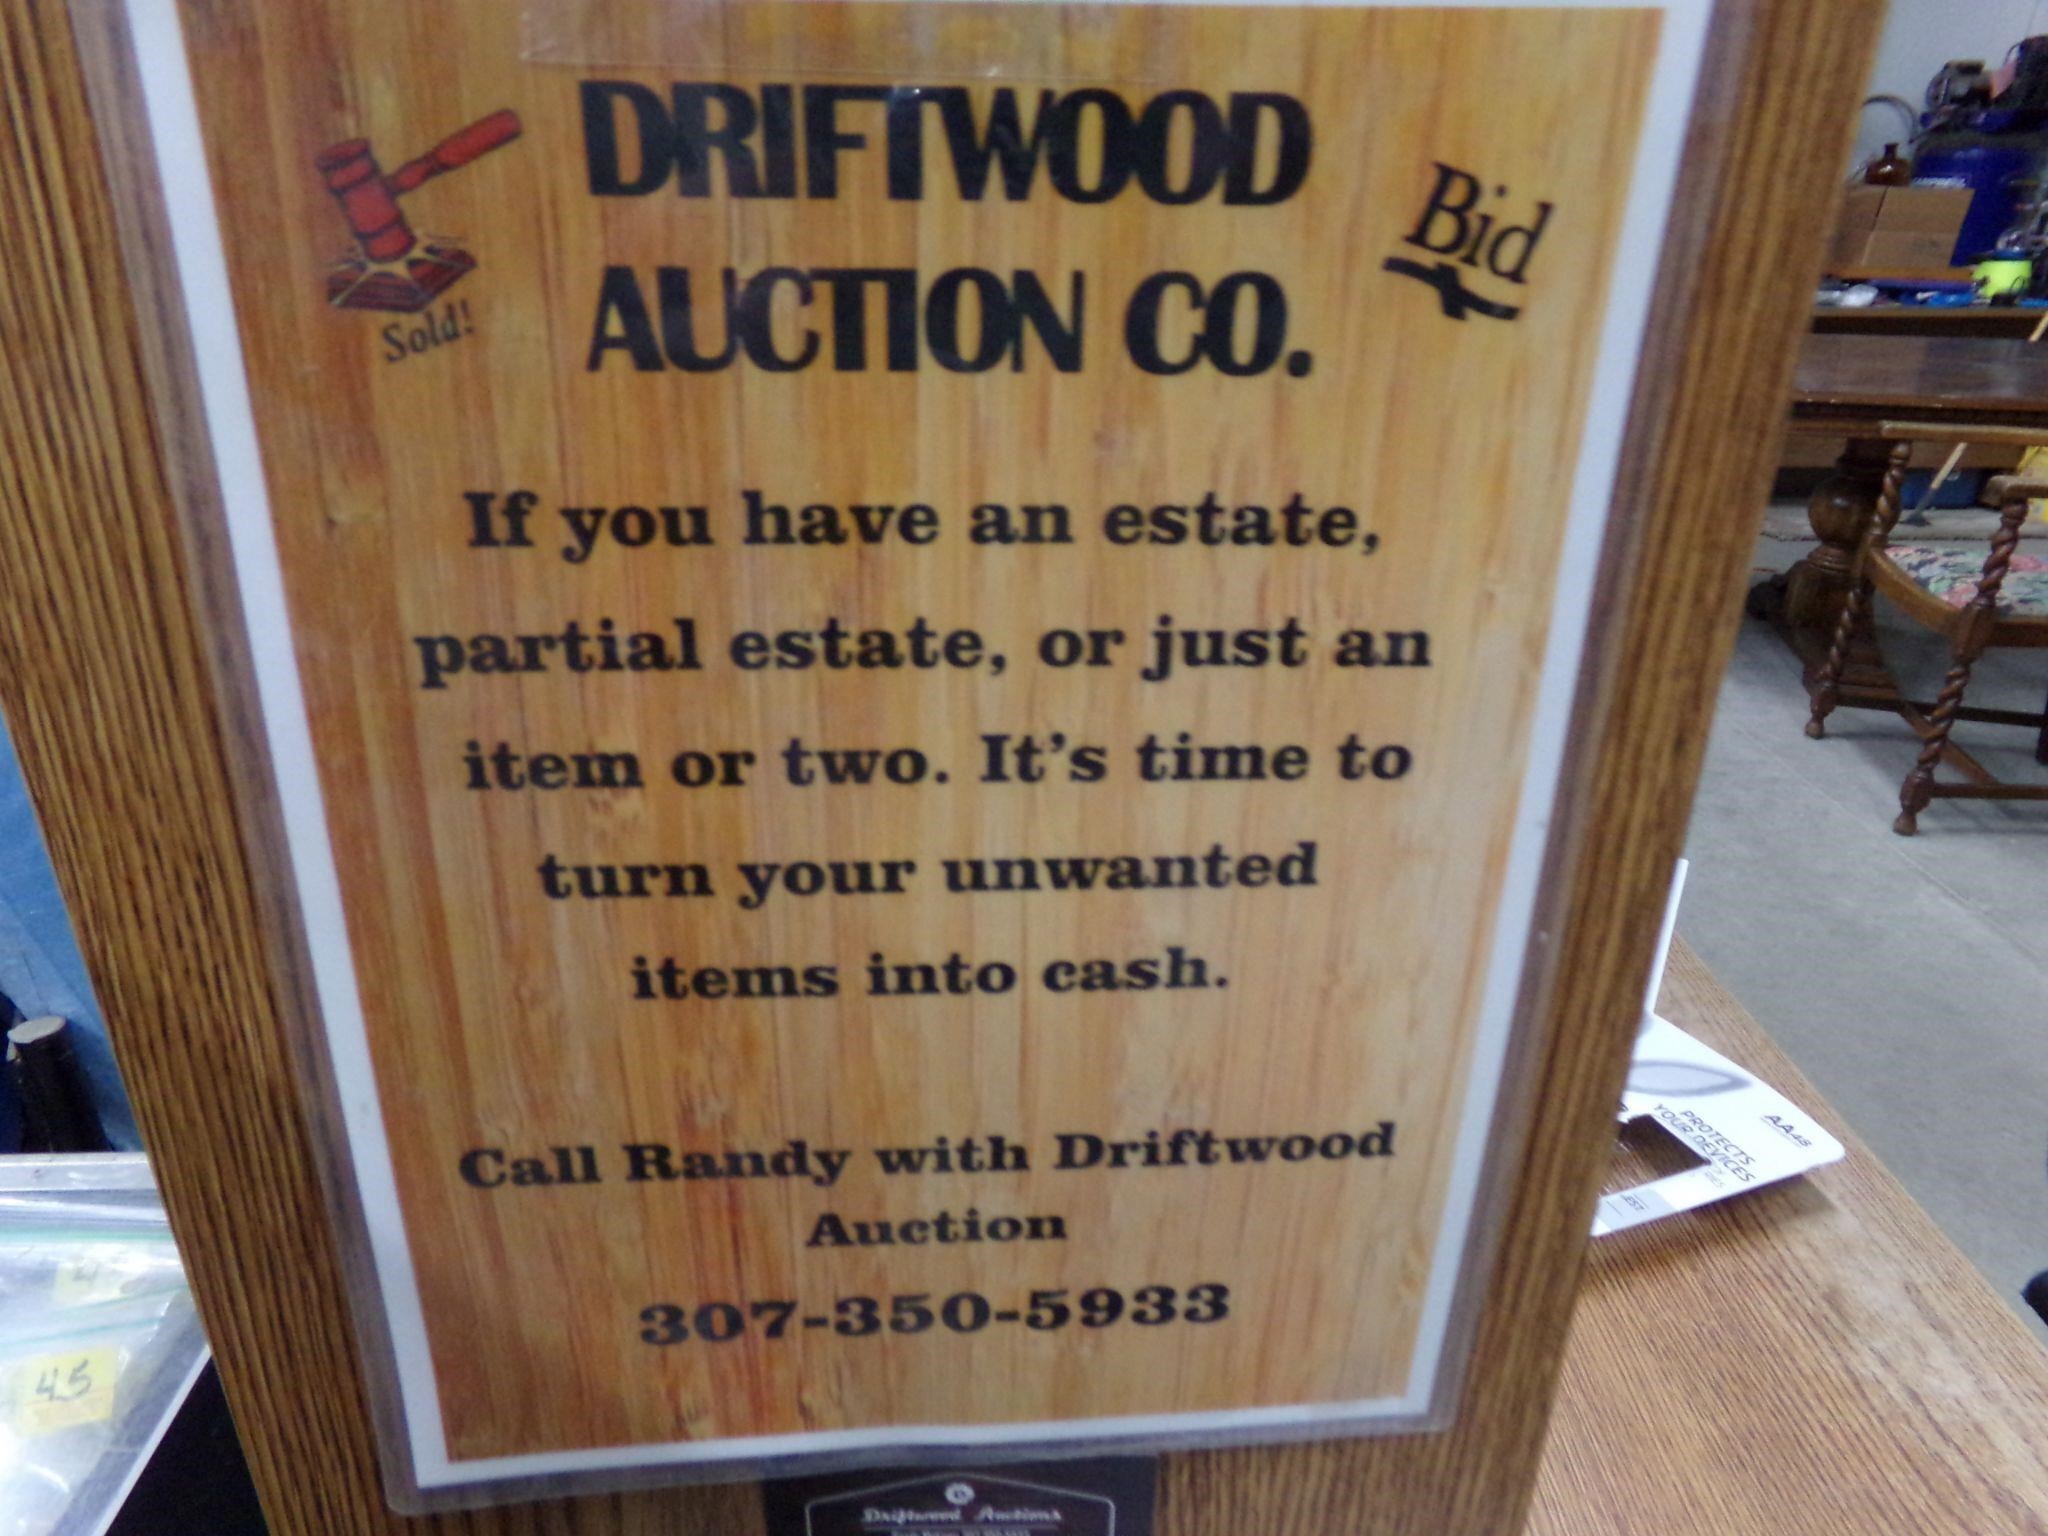 DRIFTWOOD AUCTION